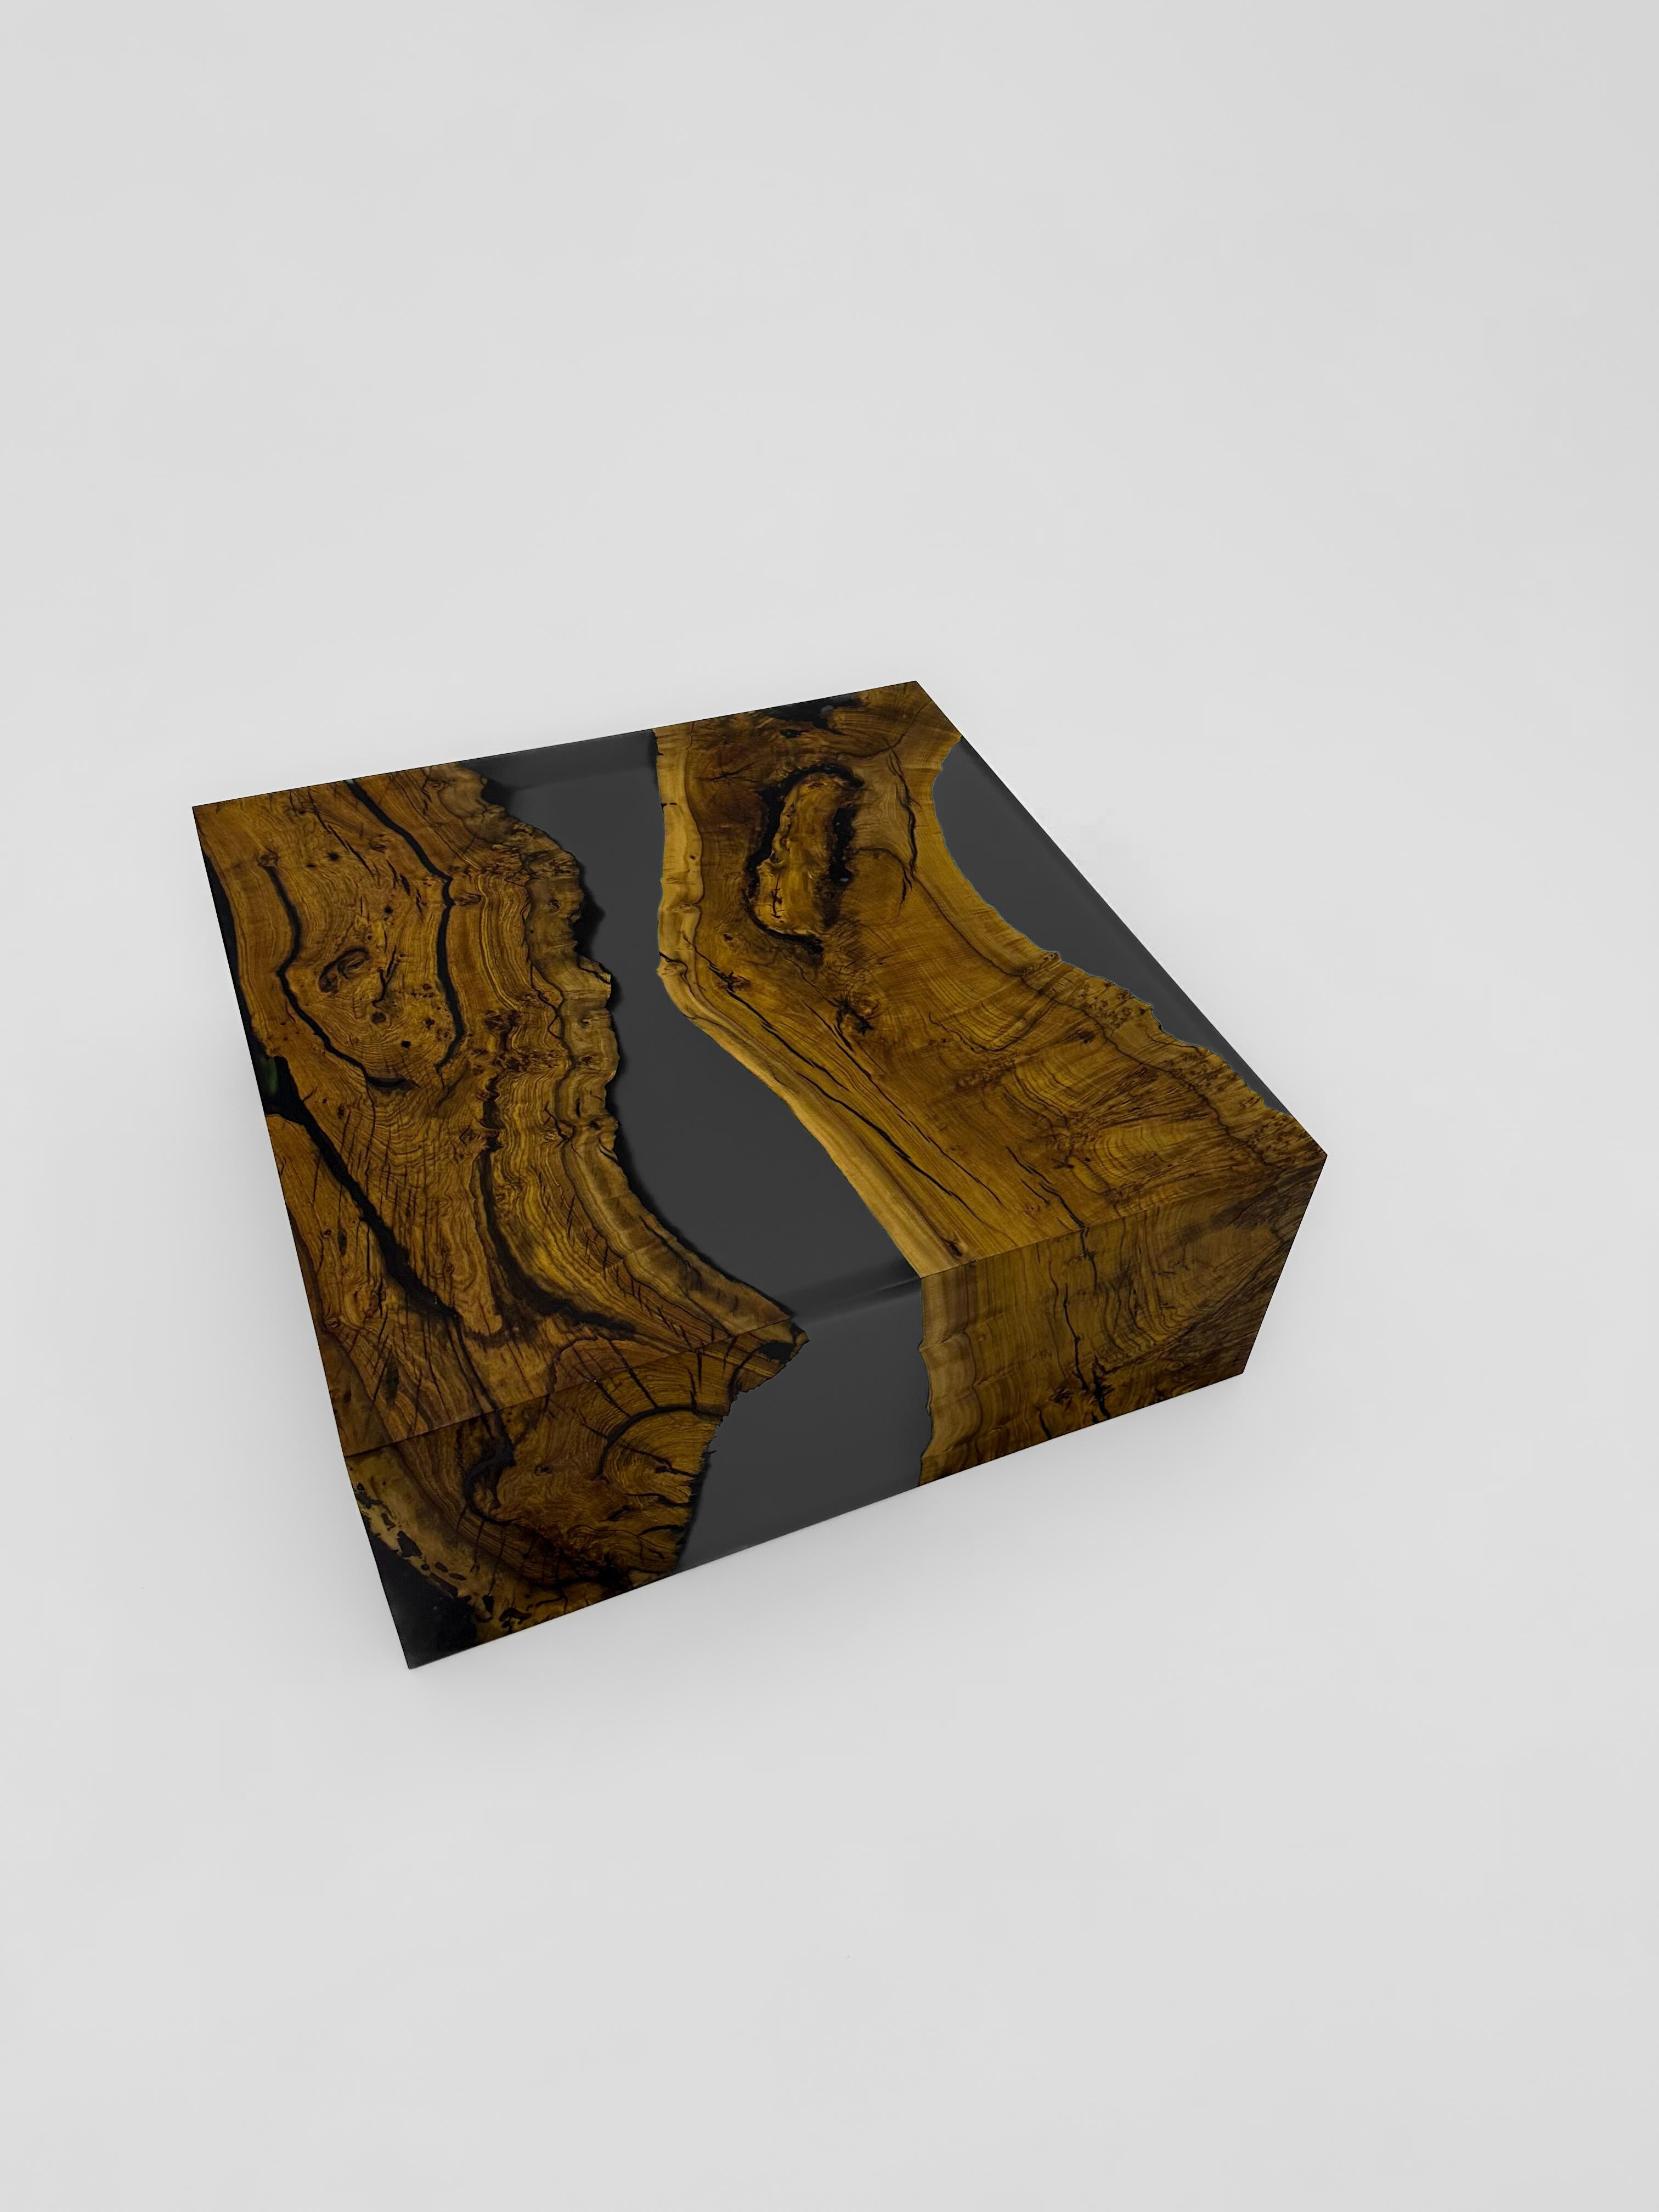 Waterfall Walnut Wood Epoxy Coffee Table

Presenting our Epoxy Waterfall Table – a true sample of craftsmanship and elegance. This exceptional piece of furniture is designed to be more than just a coffee table; it's a statement of refined taste and